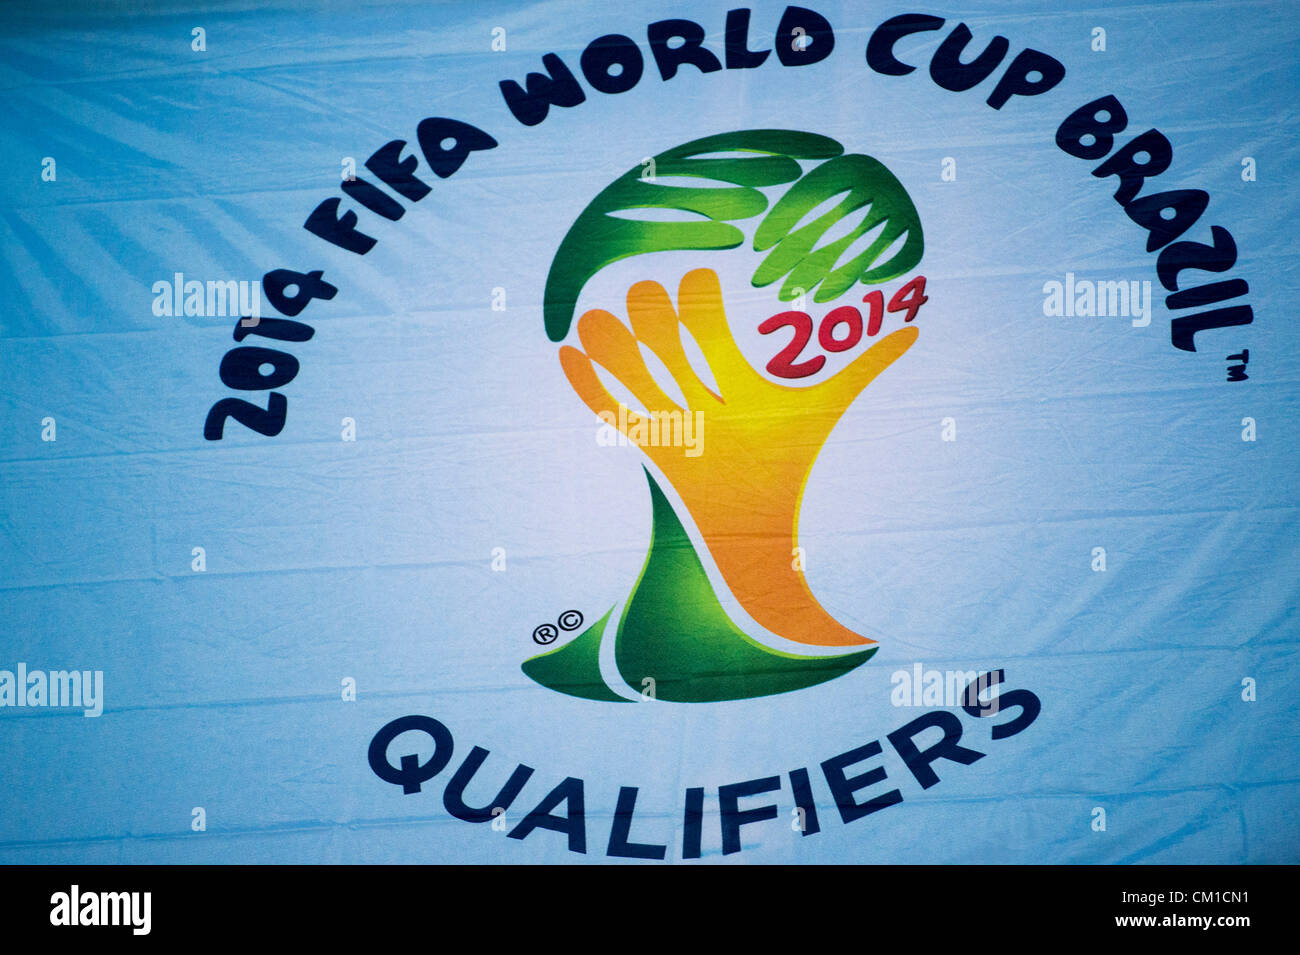 331 World Cup Brazil Logo Stock Photos, High-Res Pictures, and